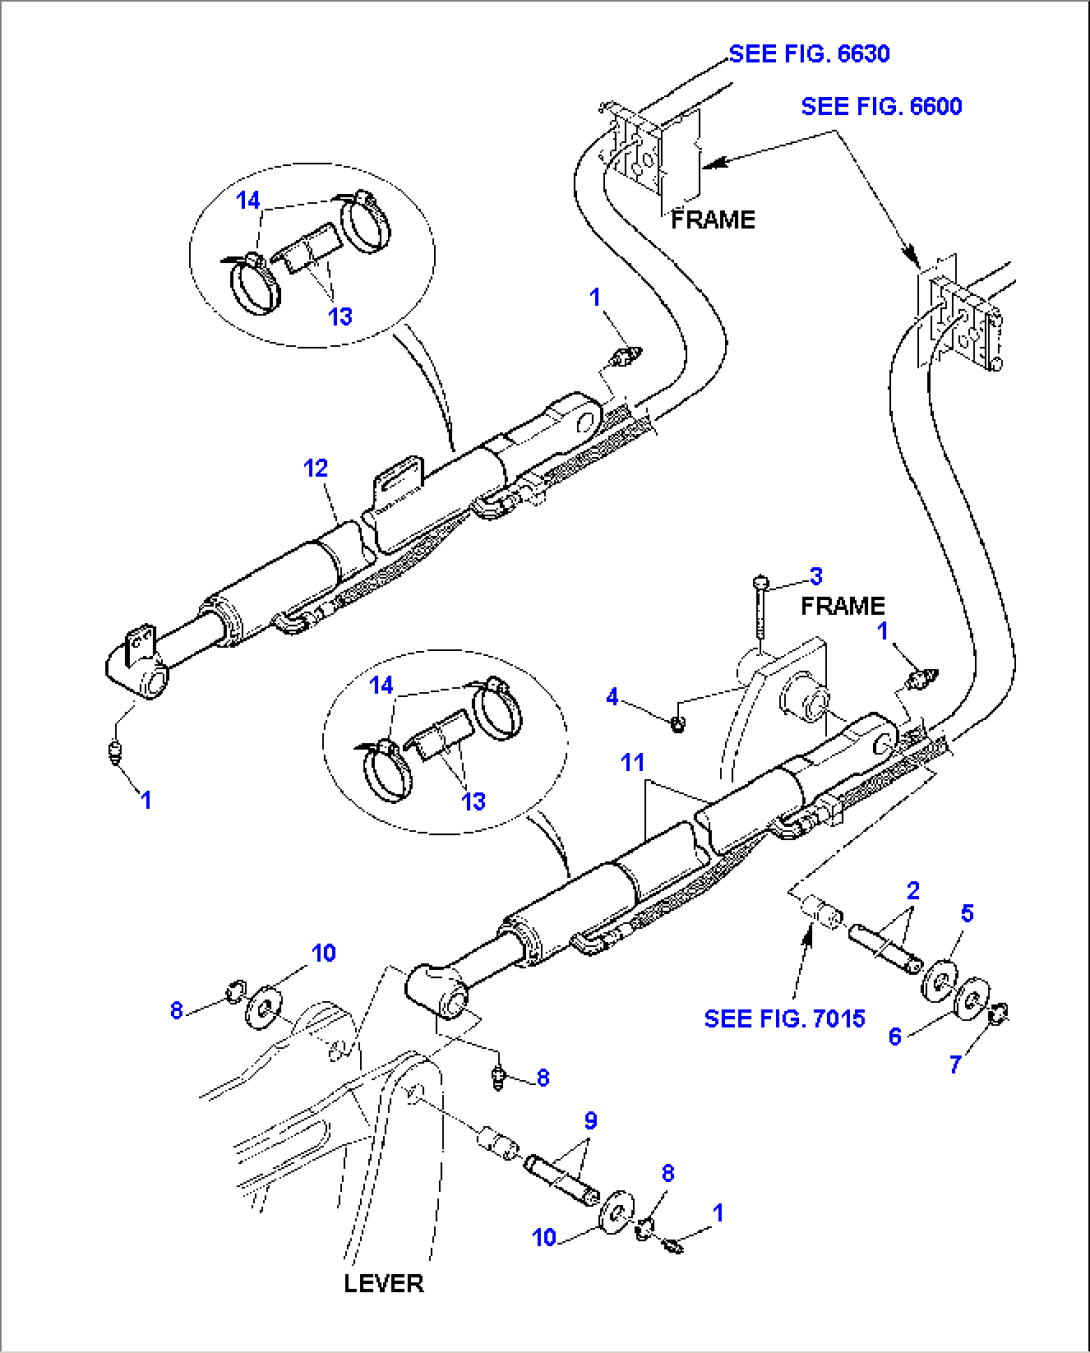 HYDRAULIC PIPING (SHOVEL TIPPING CYLINDER LINE) (2/2)